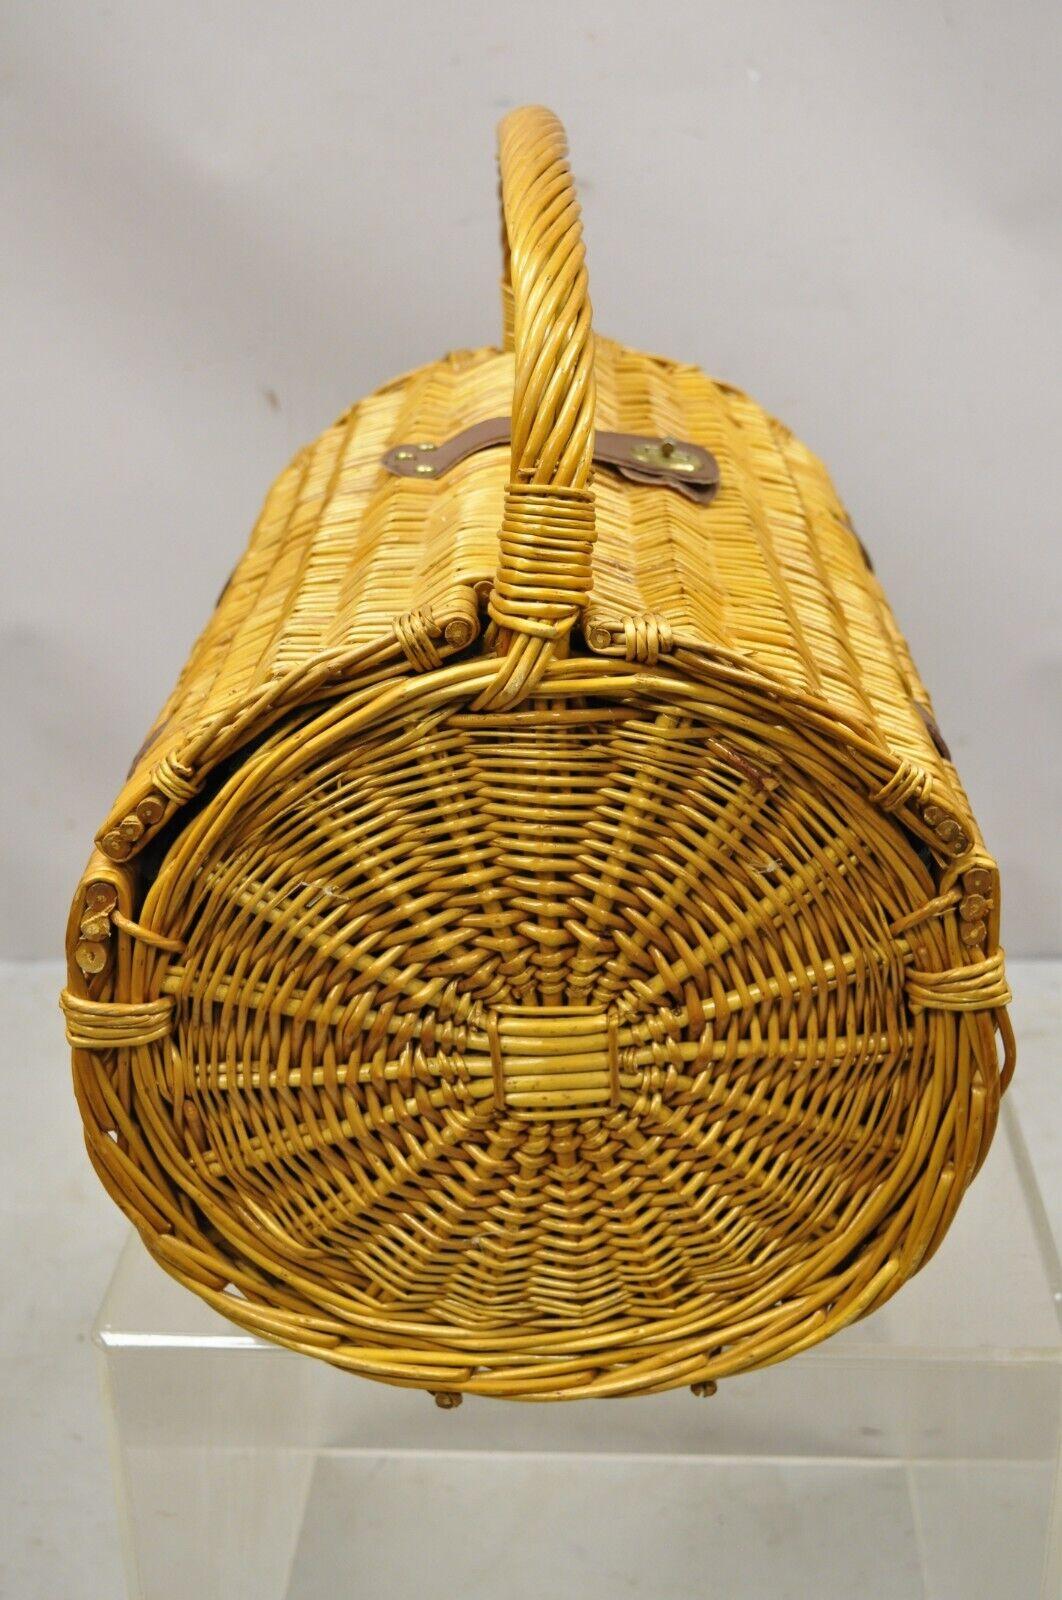 Vintage Style Cylinder Deluxe Wicker Picnic Basket, Svc for 2 3